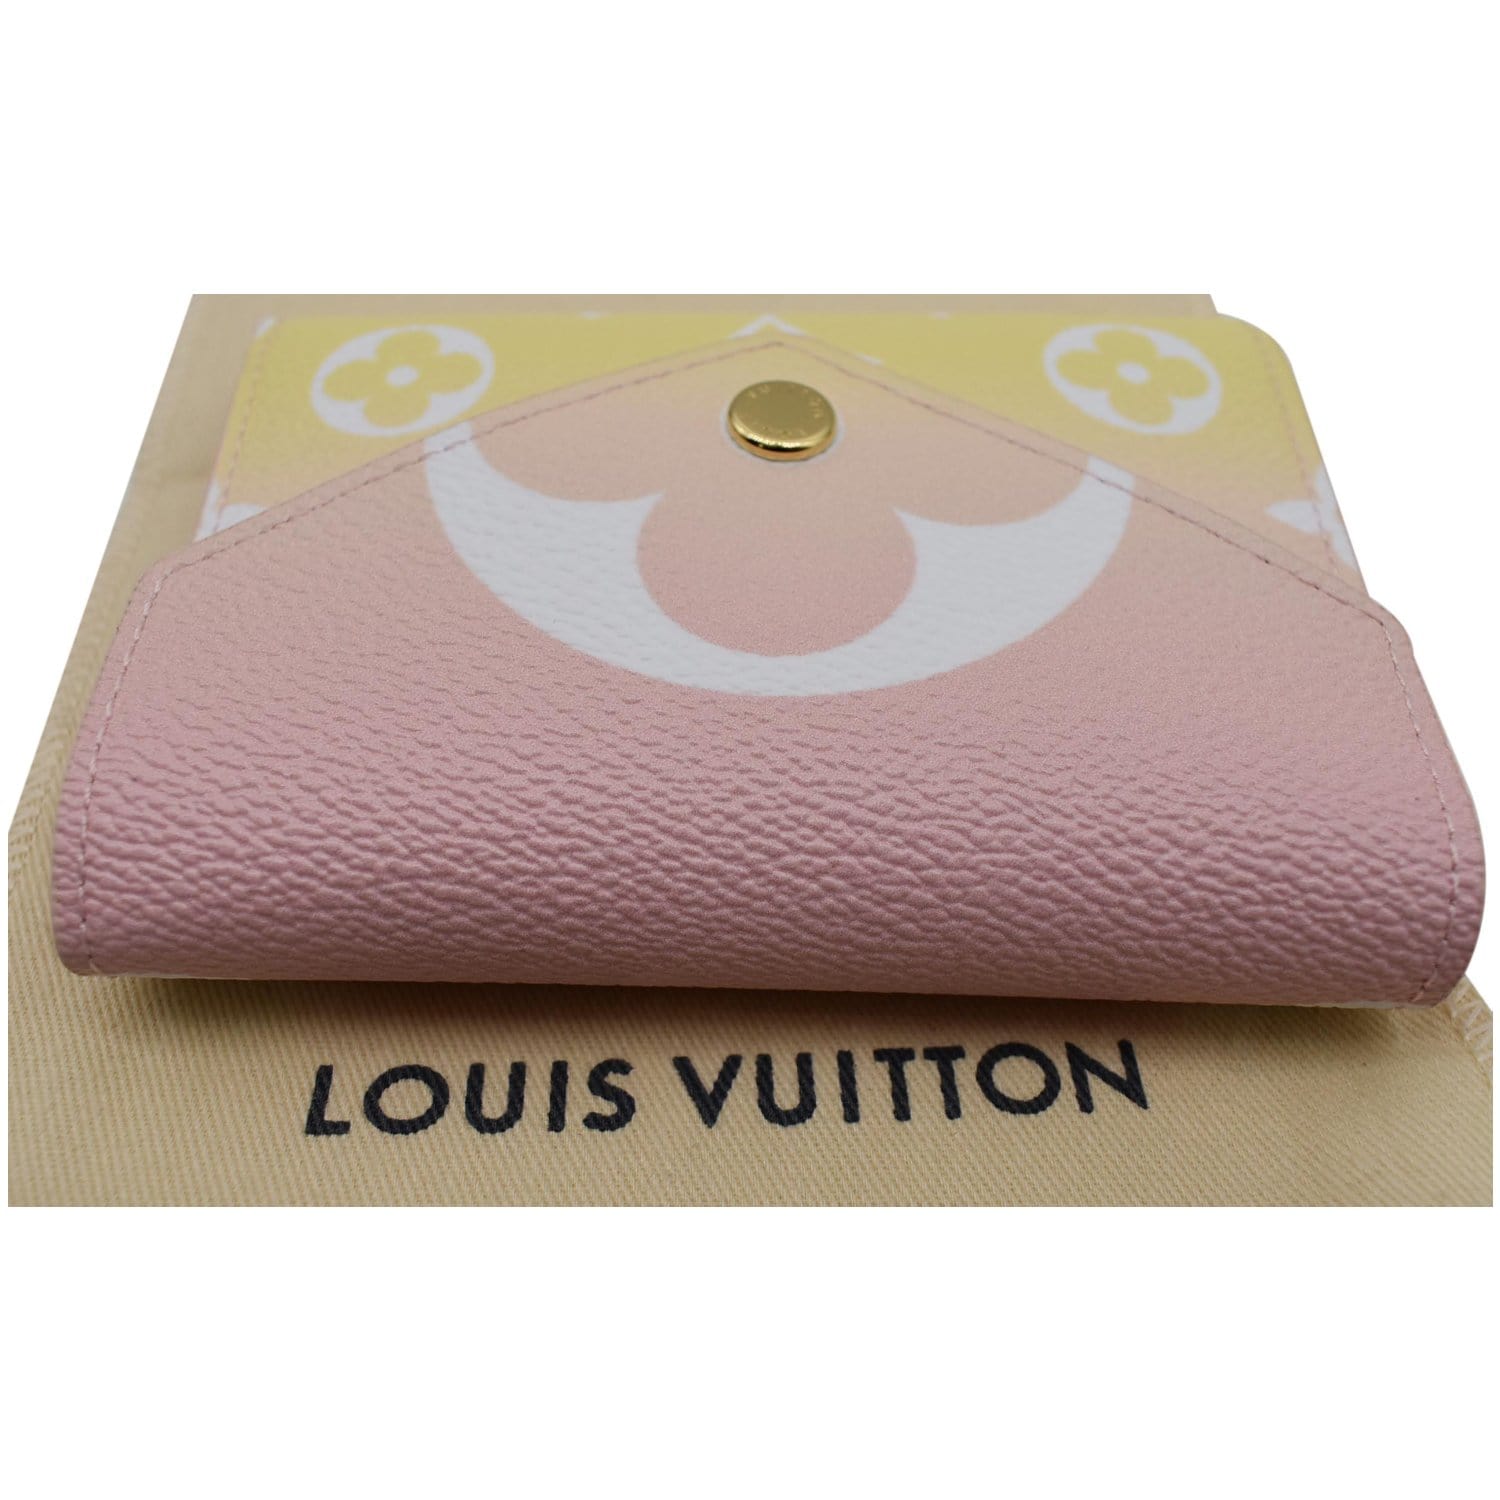 LOUIS VUITTON Monogram Giant By The Pool Victorine Wallet Light Pink 763259